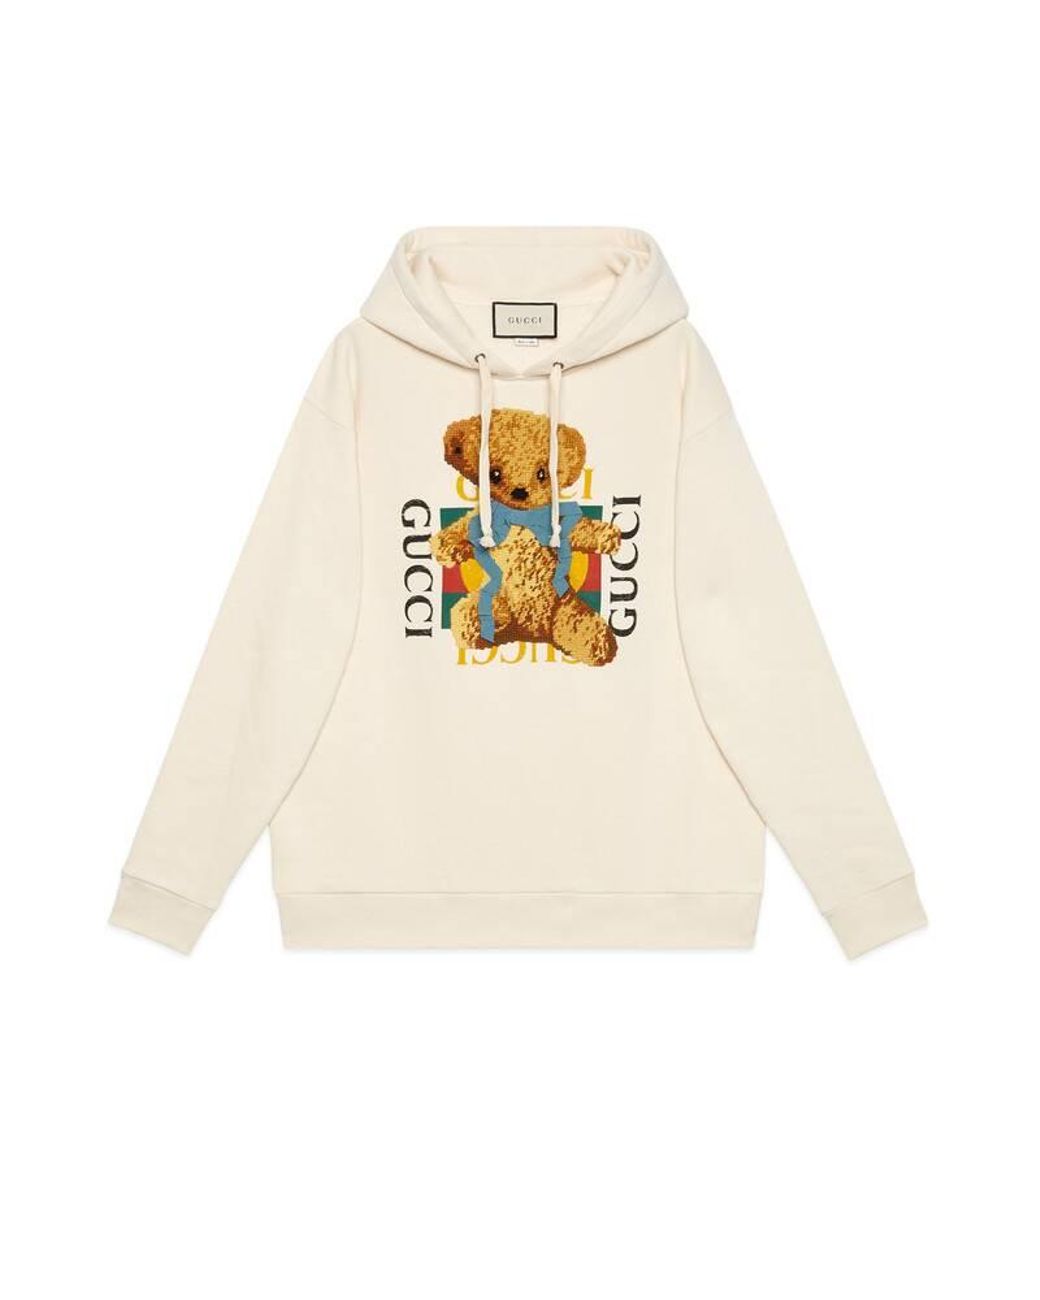 Gucci Oversize Sweatshirt With Logo And Teddy Bear in Natural | Lyst